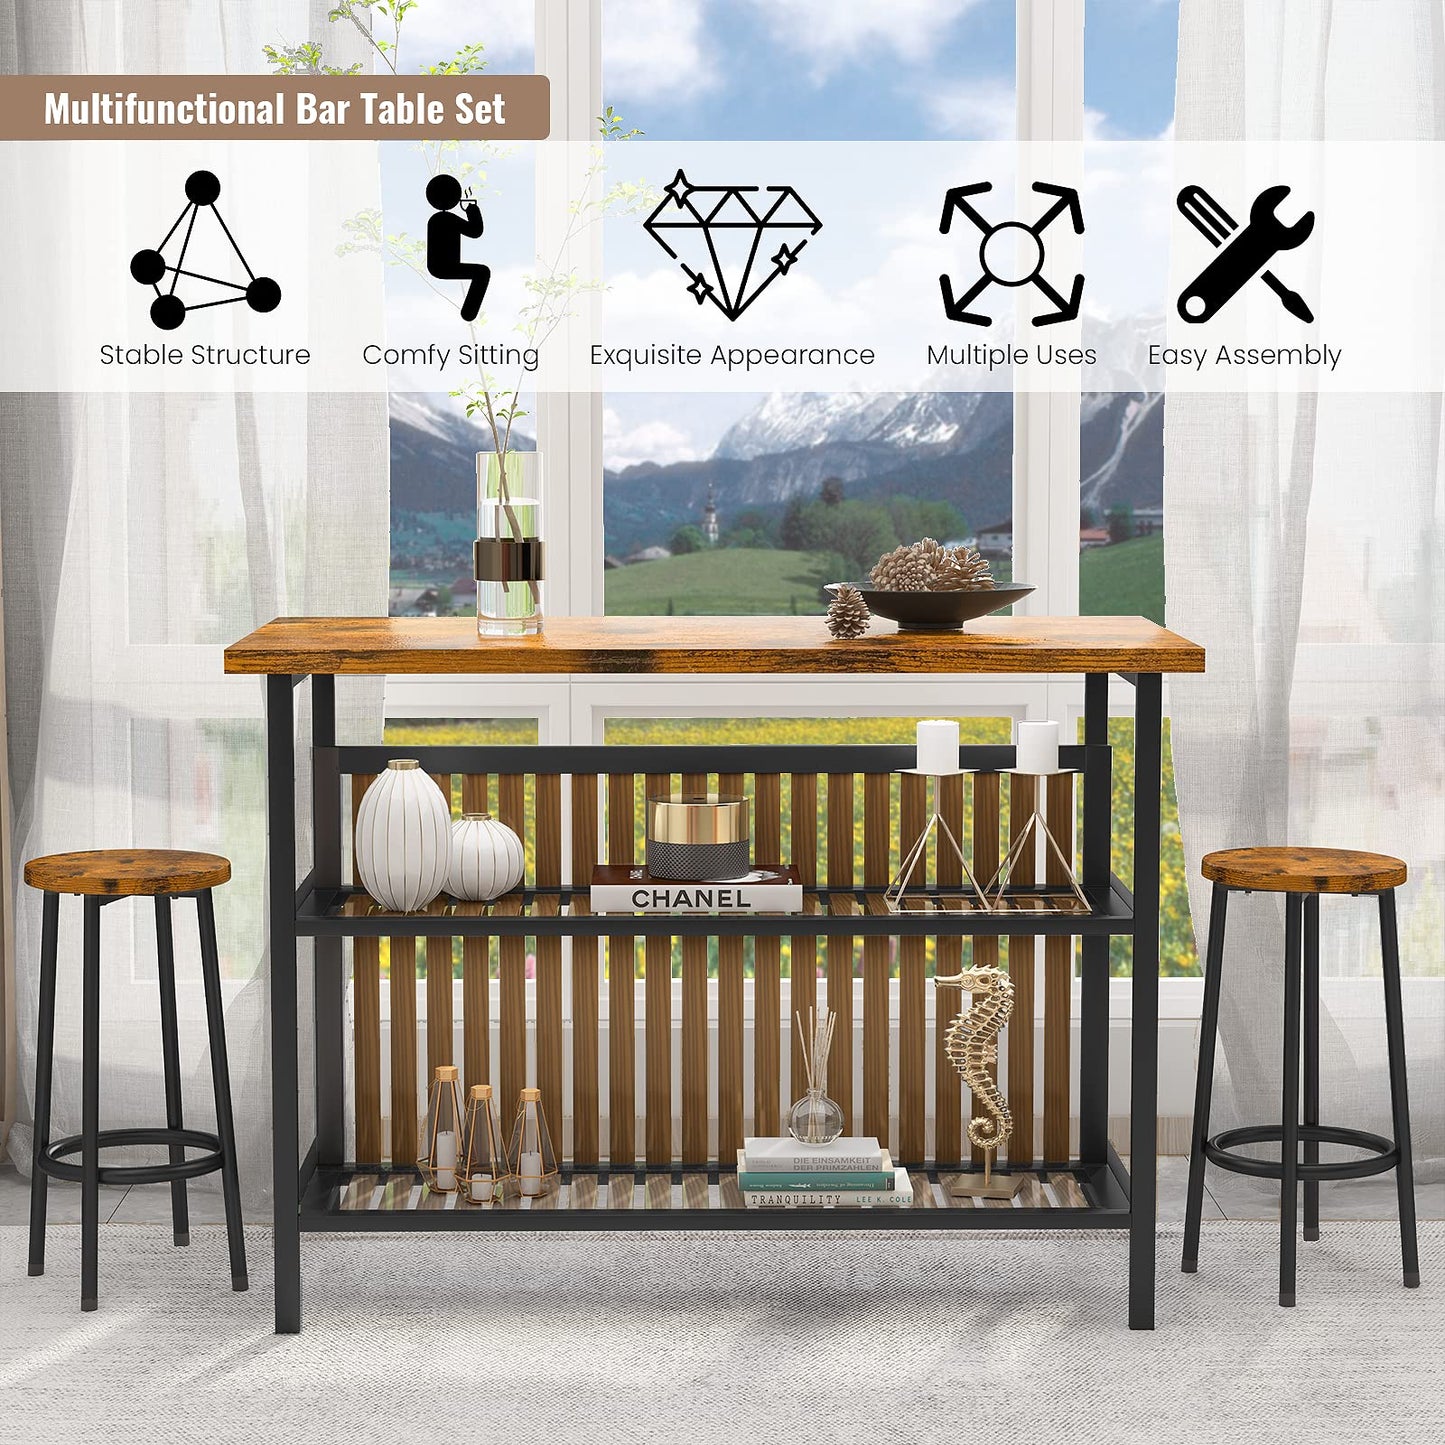 AWQM Kitchen Island with Seating, Wooden Counter Height Table with Storage Kitchen Table Set for 2, Pub Table Bar Table Set, 3 Piece Dining Table Set for Small Space,Walnut